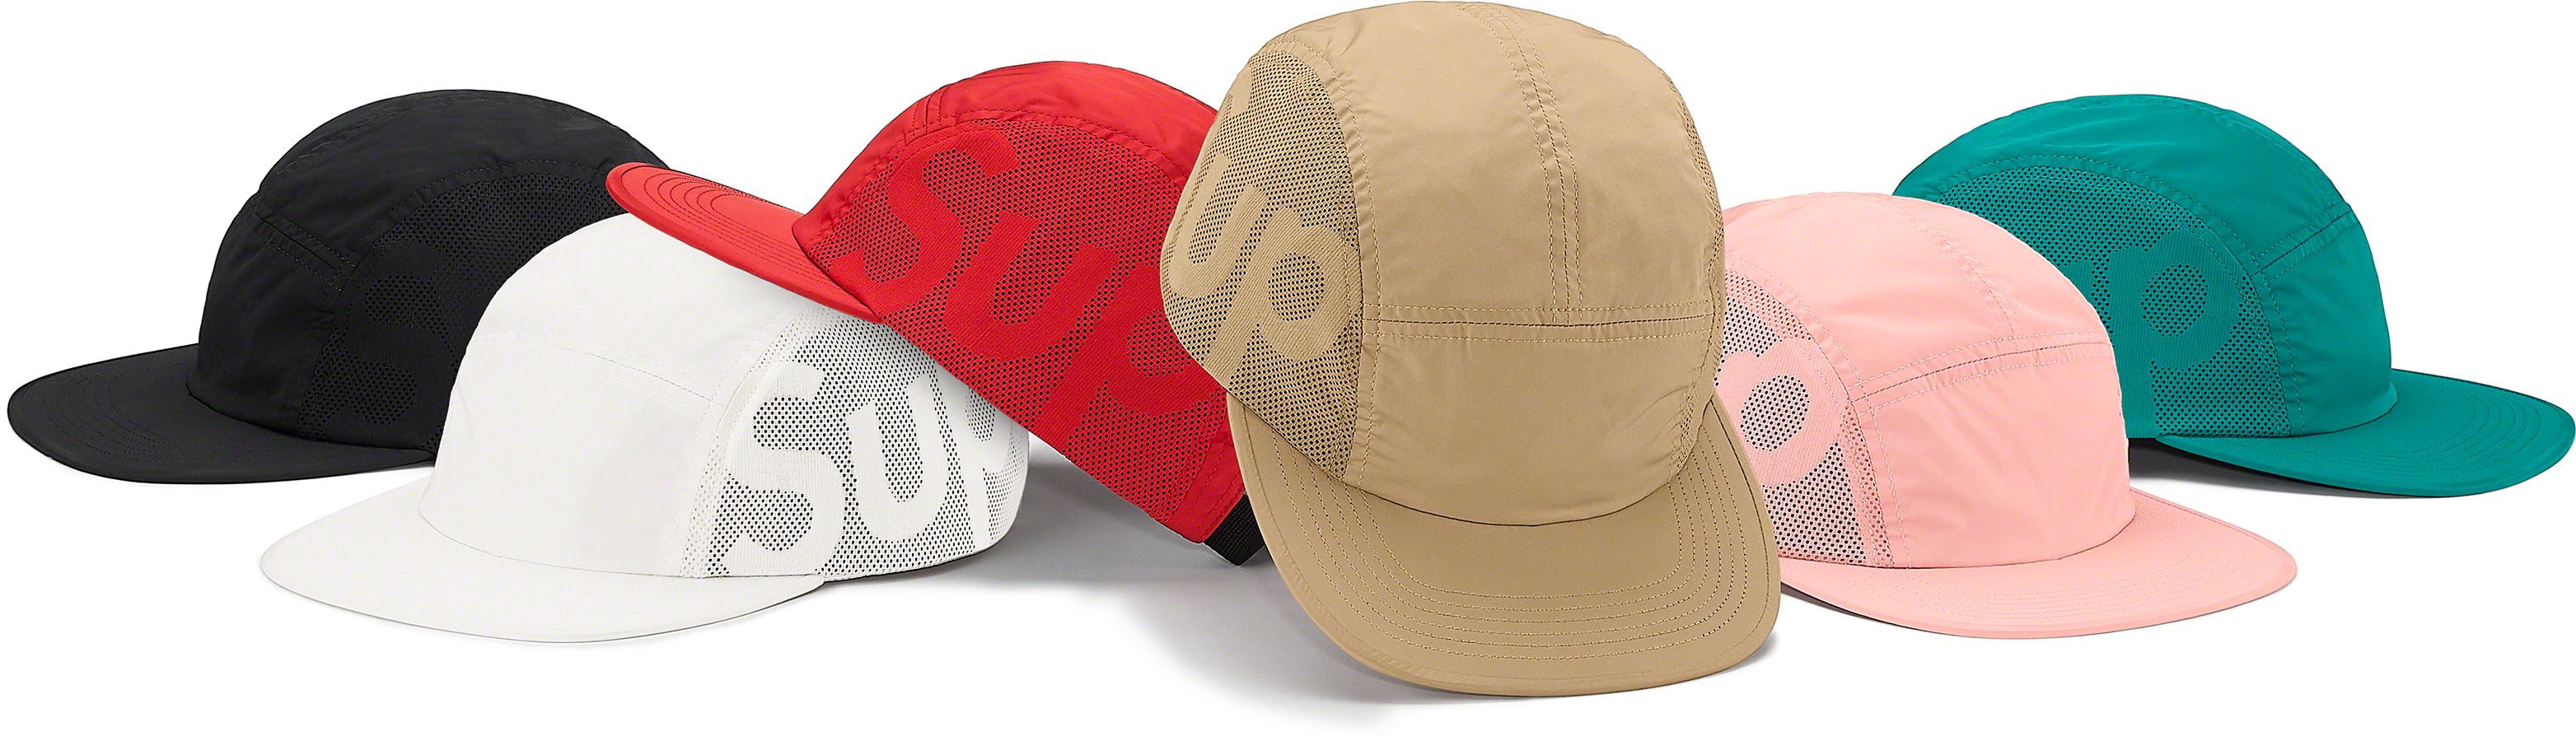 Afternoon Camp Cap - Fall/Winter 2019 Preview – Supreme